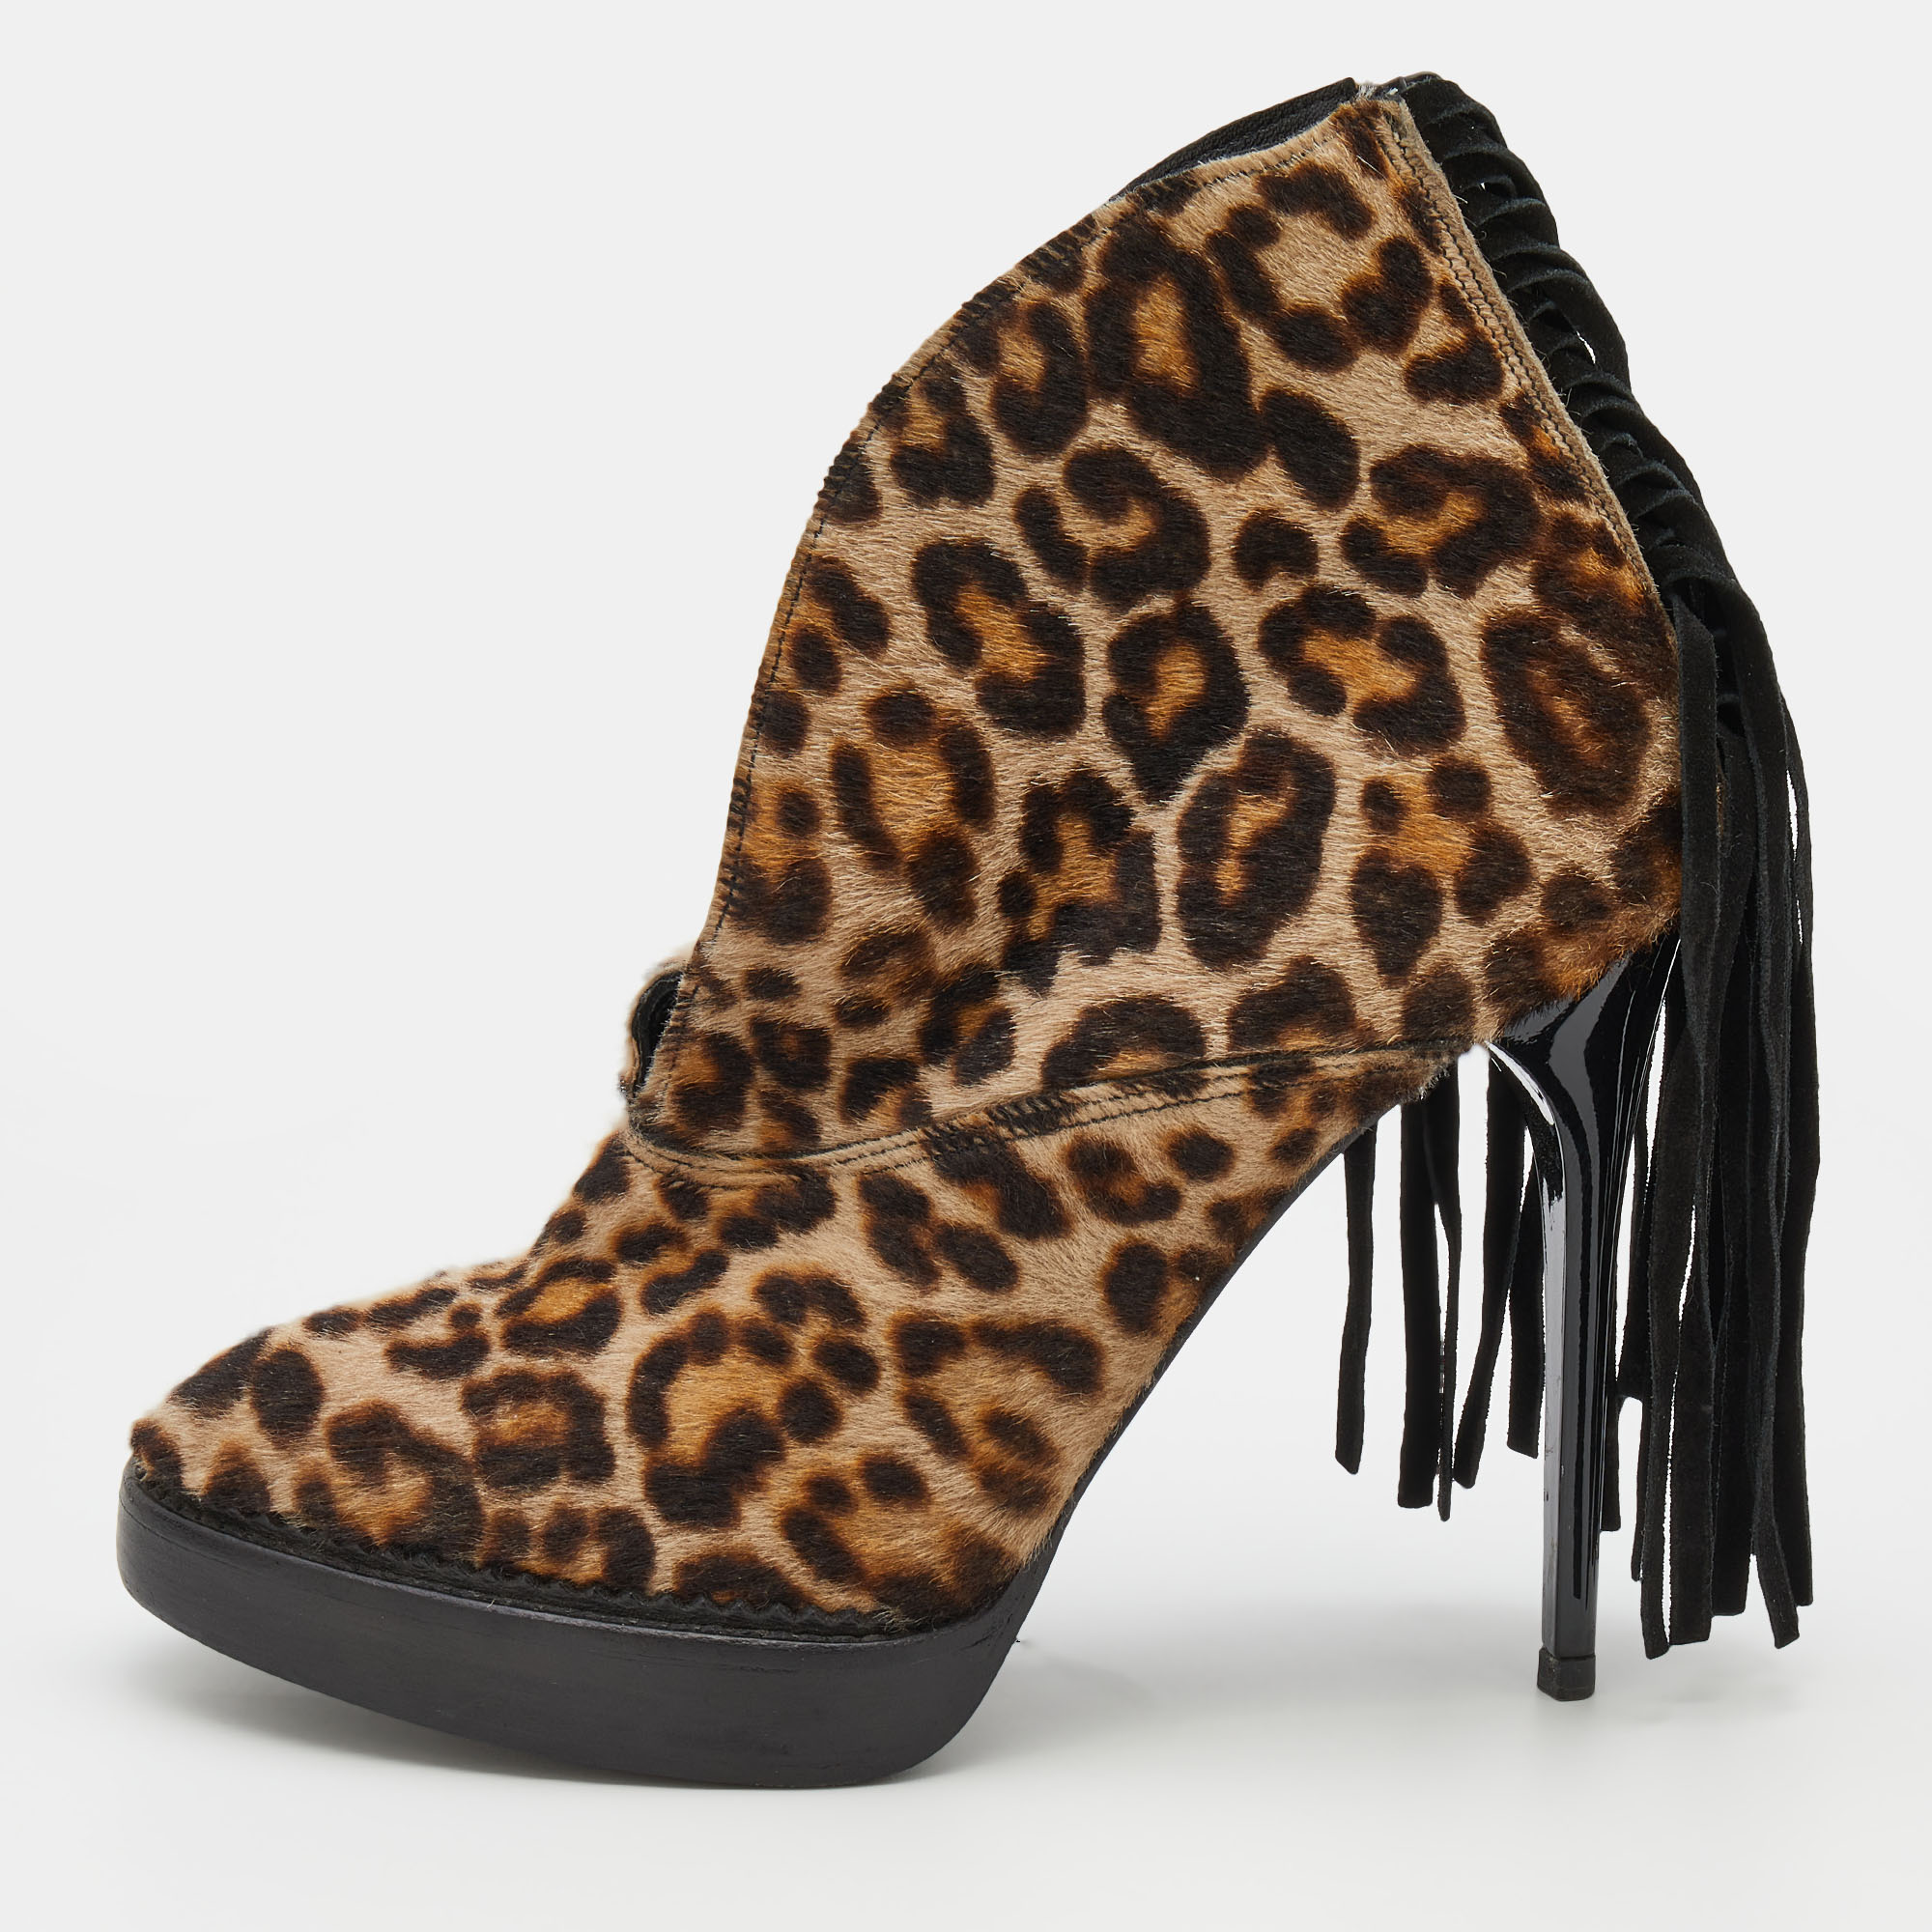 Give your outfit a chic update with this pair of Burberry ankle boots. The creation is sewn perfectly using leopard print calf hair and added with fringes back zippers platforms and 12 cm heels. Make a statement in these